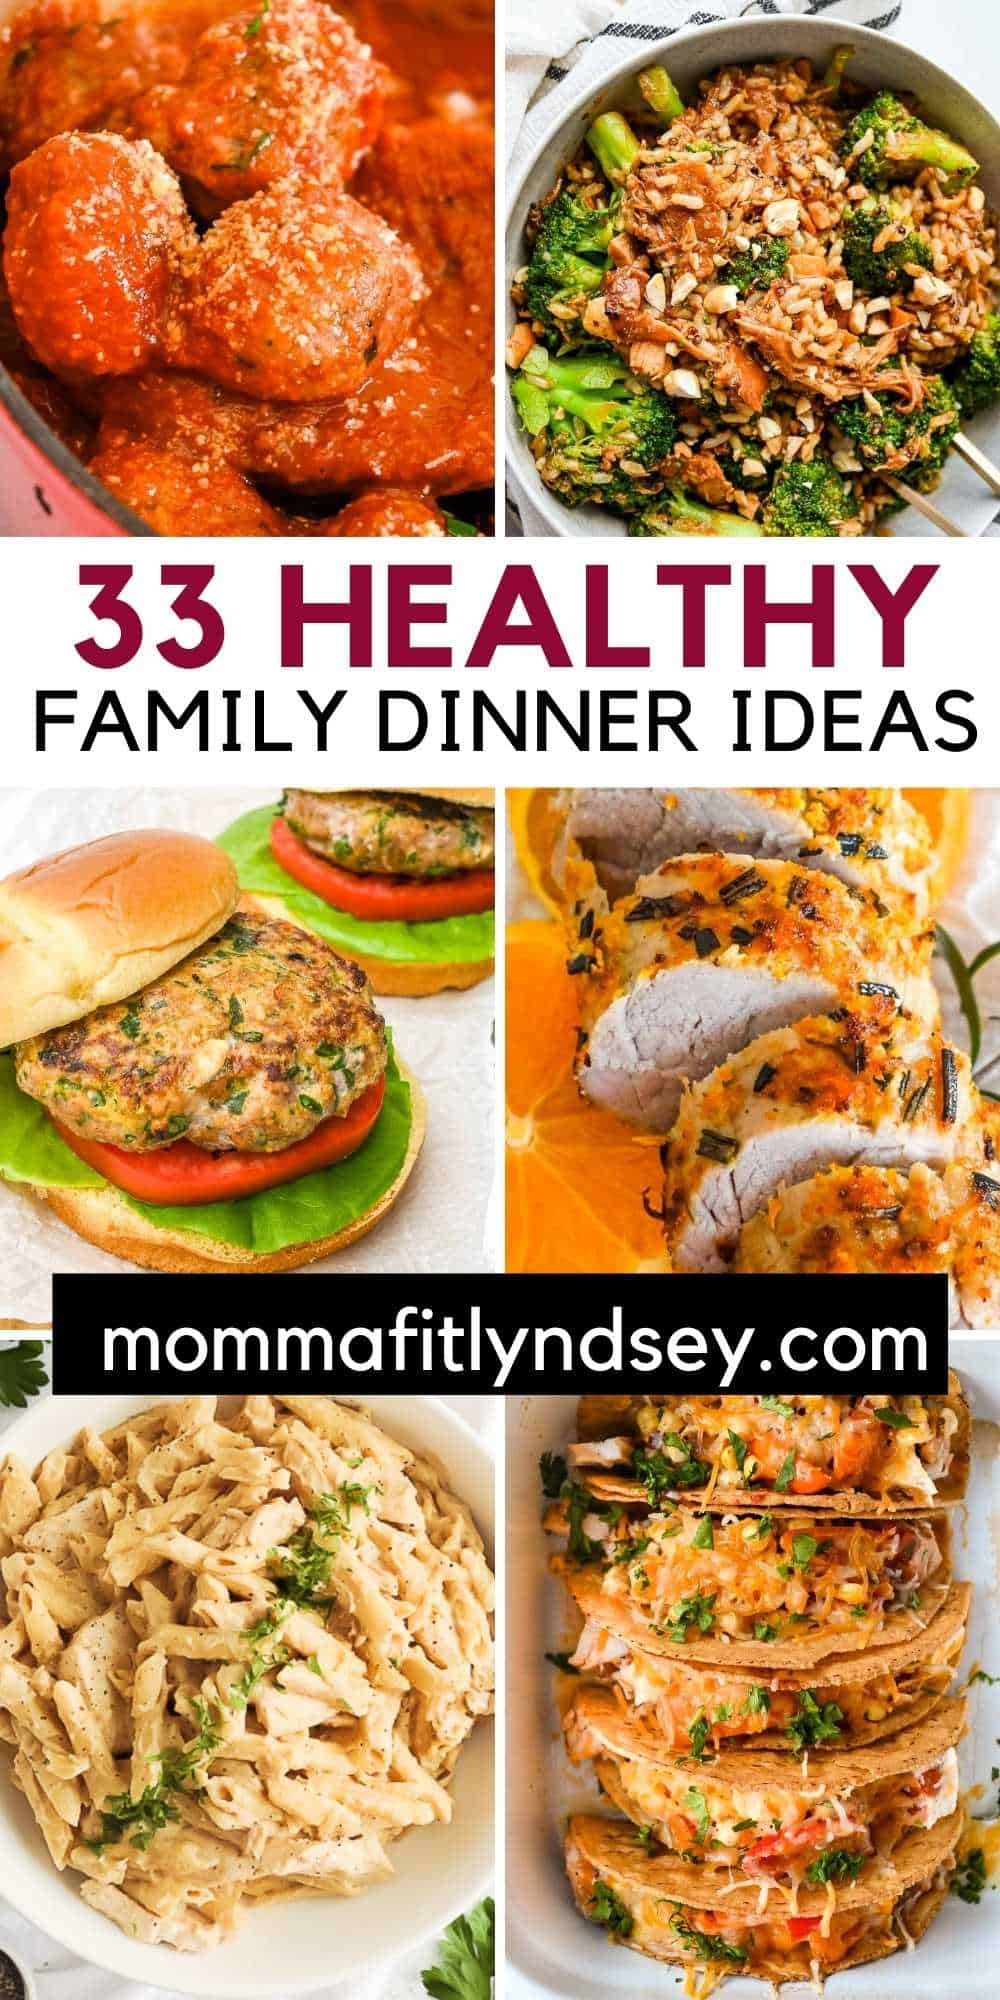 33 Quick, Easy, and Healthy Family Dinner Ideas - Momma Fit Lyndsey